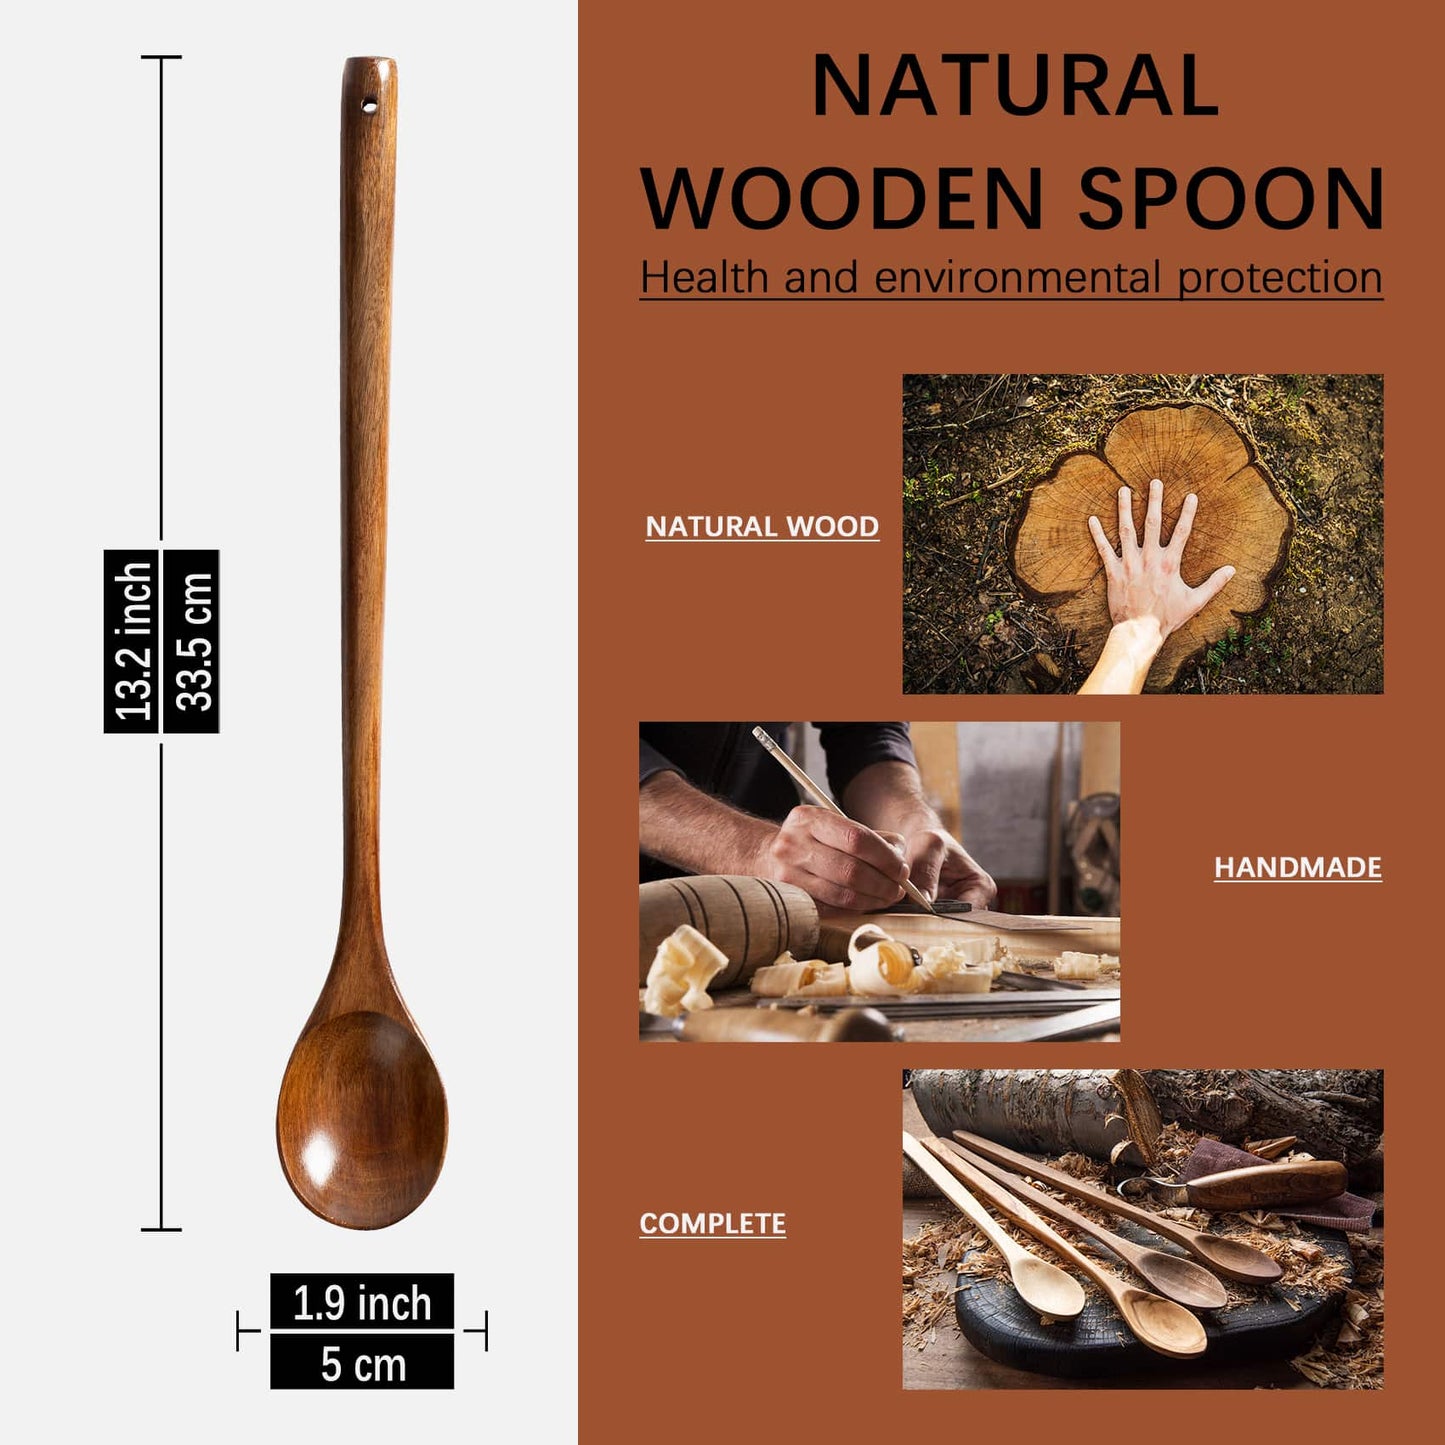 This handmade natural wood spoon measures 13.2 inches in length and 1.9 inches in width!